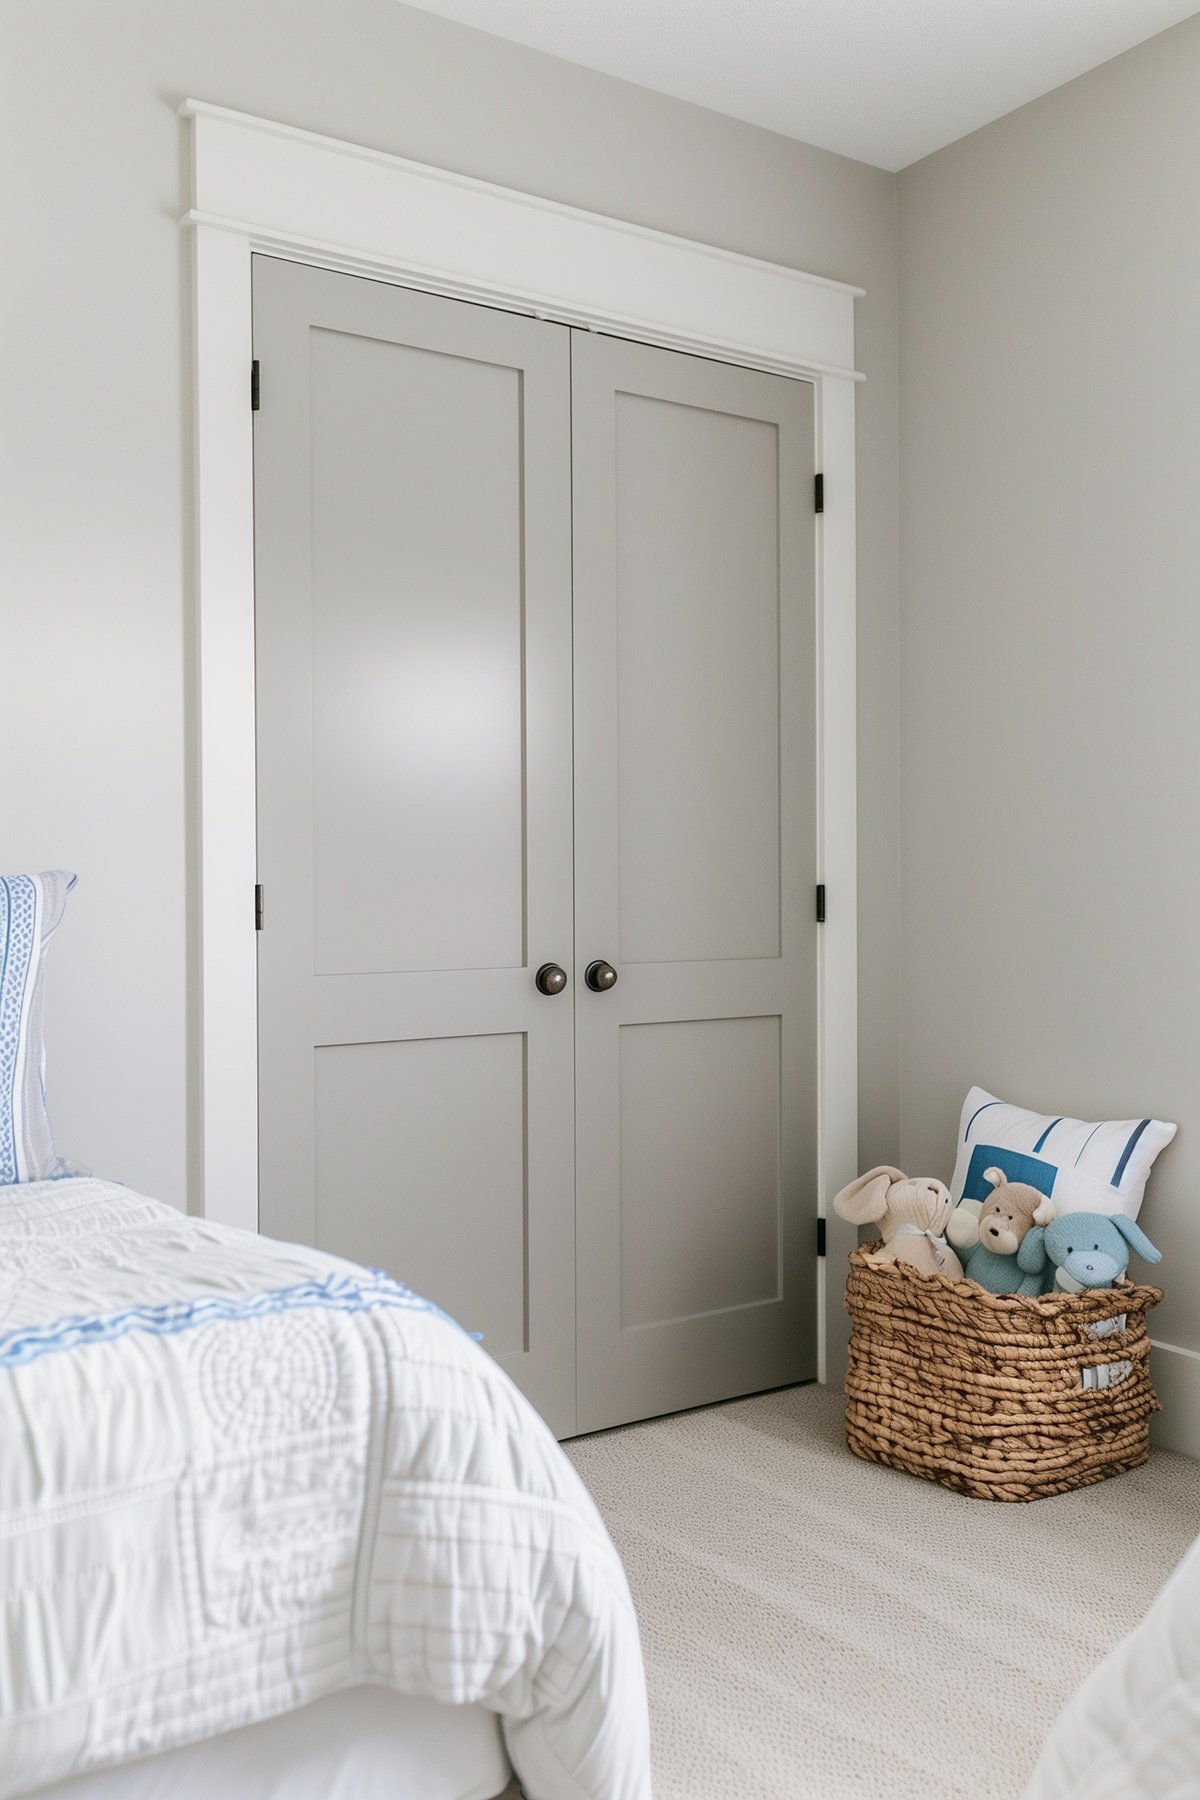 Kid's bedroom with double closet doors painted Sherwin WIlliams Agreeable Gray.